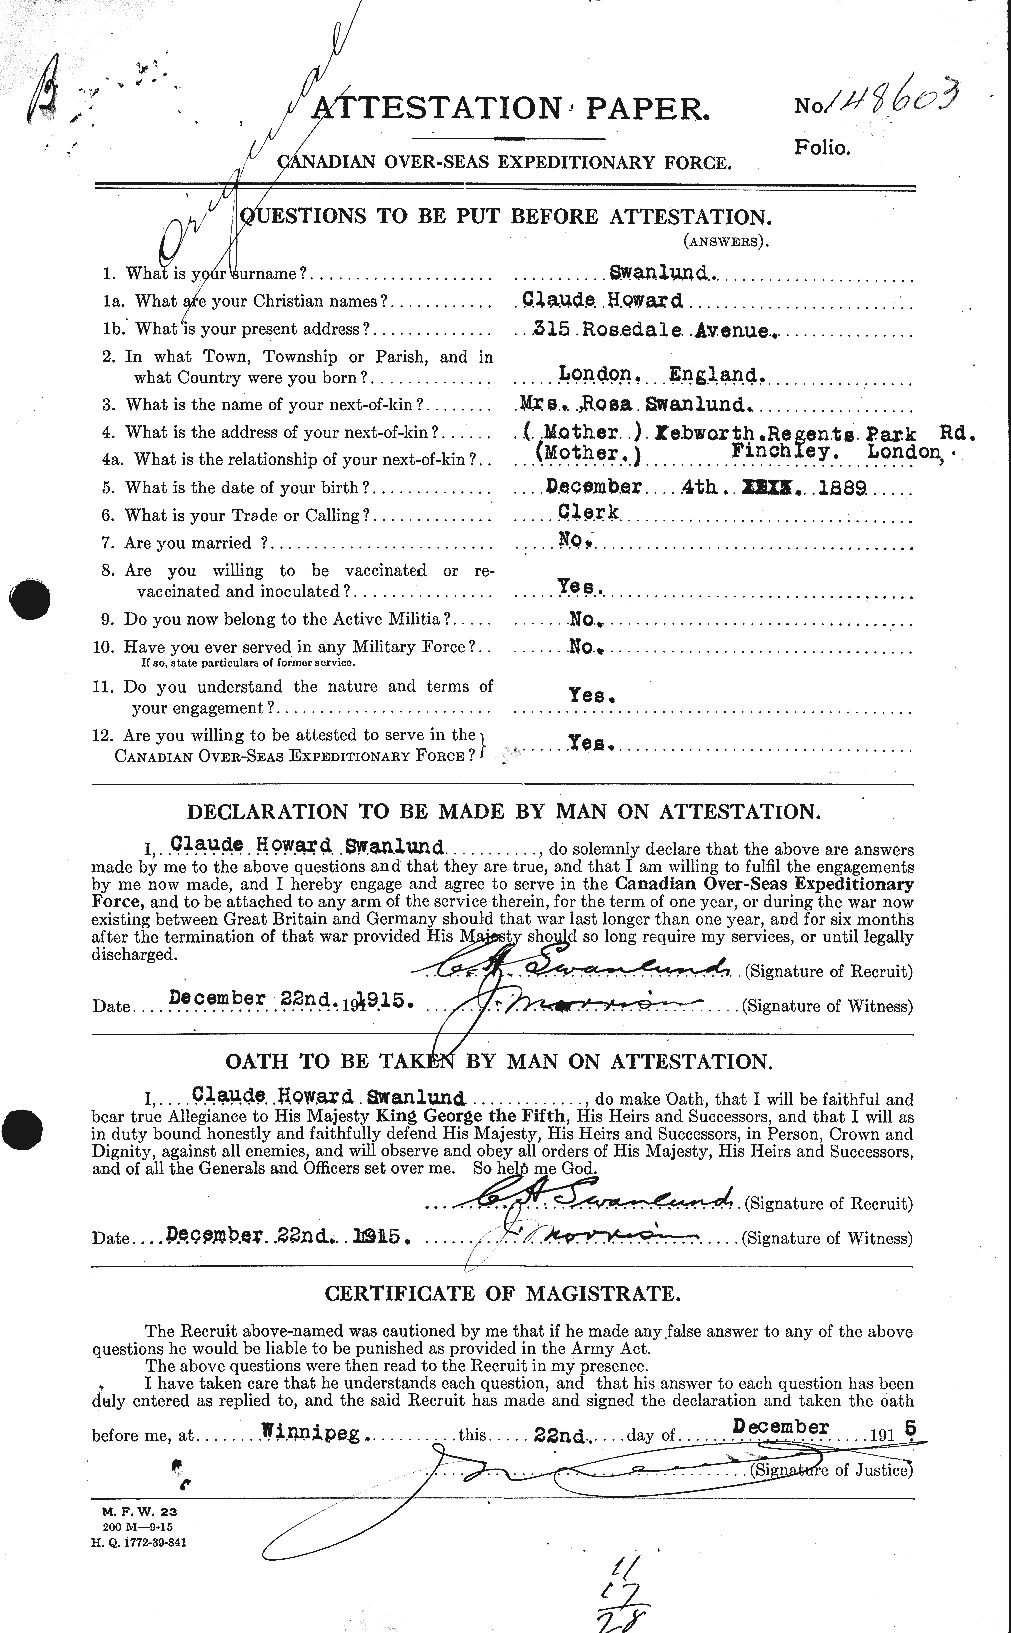 Personnel Records of the First World War - CEF 085277a